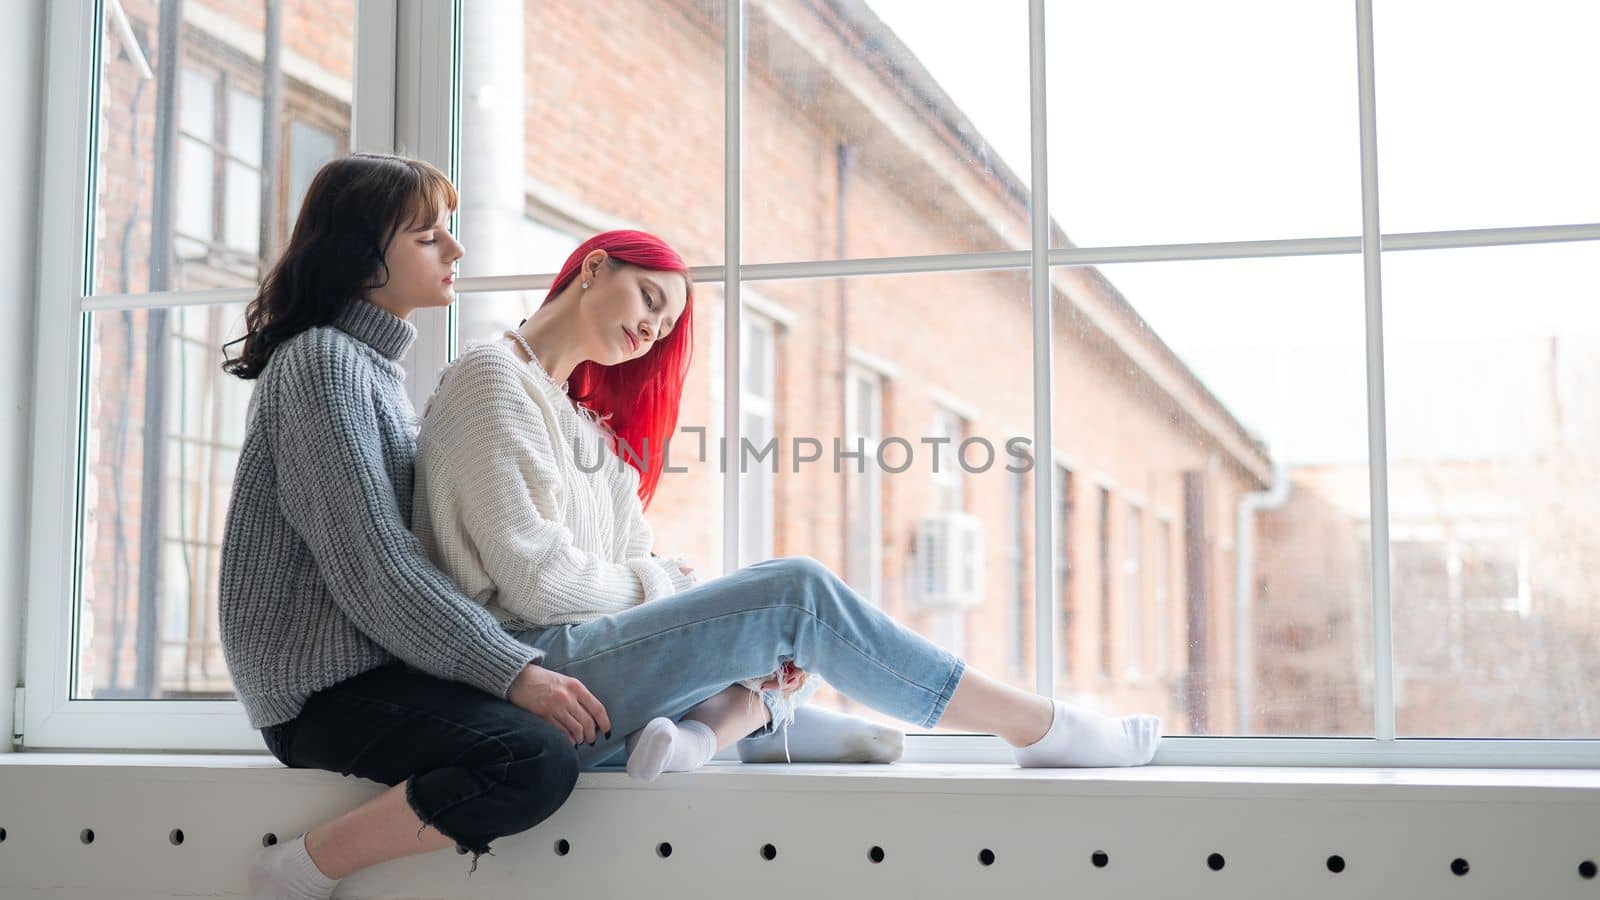 Two women dressed in sweaters sit by the window and gently hug. Lesbian intimacy